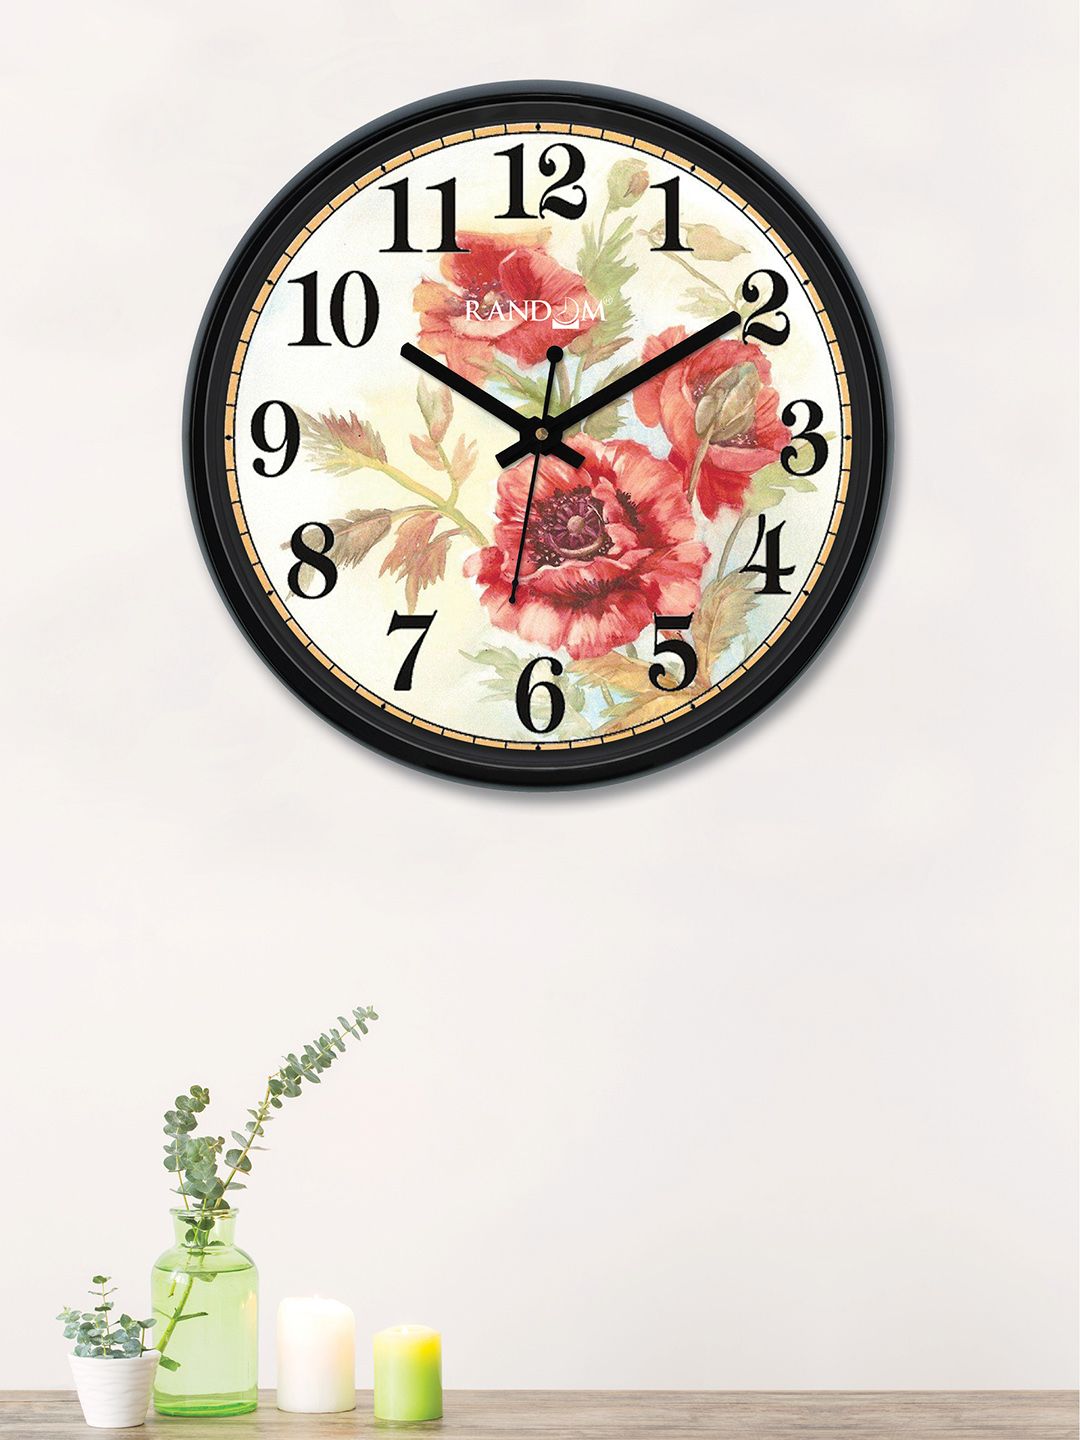 RANDOM Off-White & Red Round Printed 30 cm Analogue Wall Clock Price in India